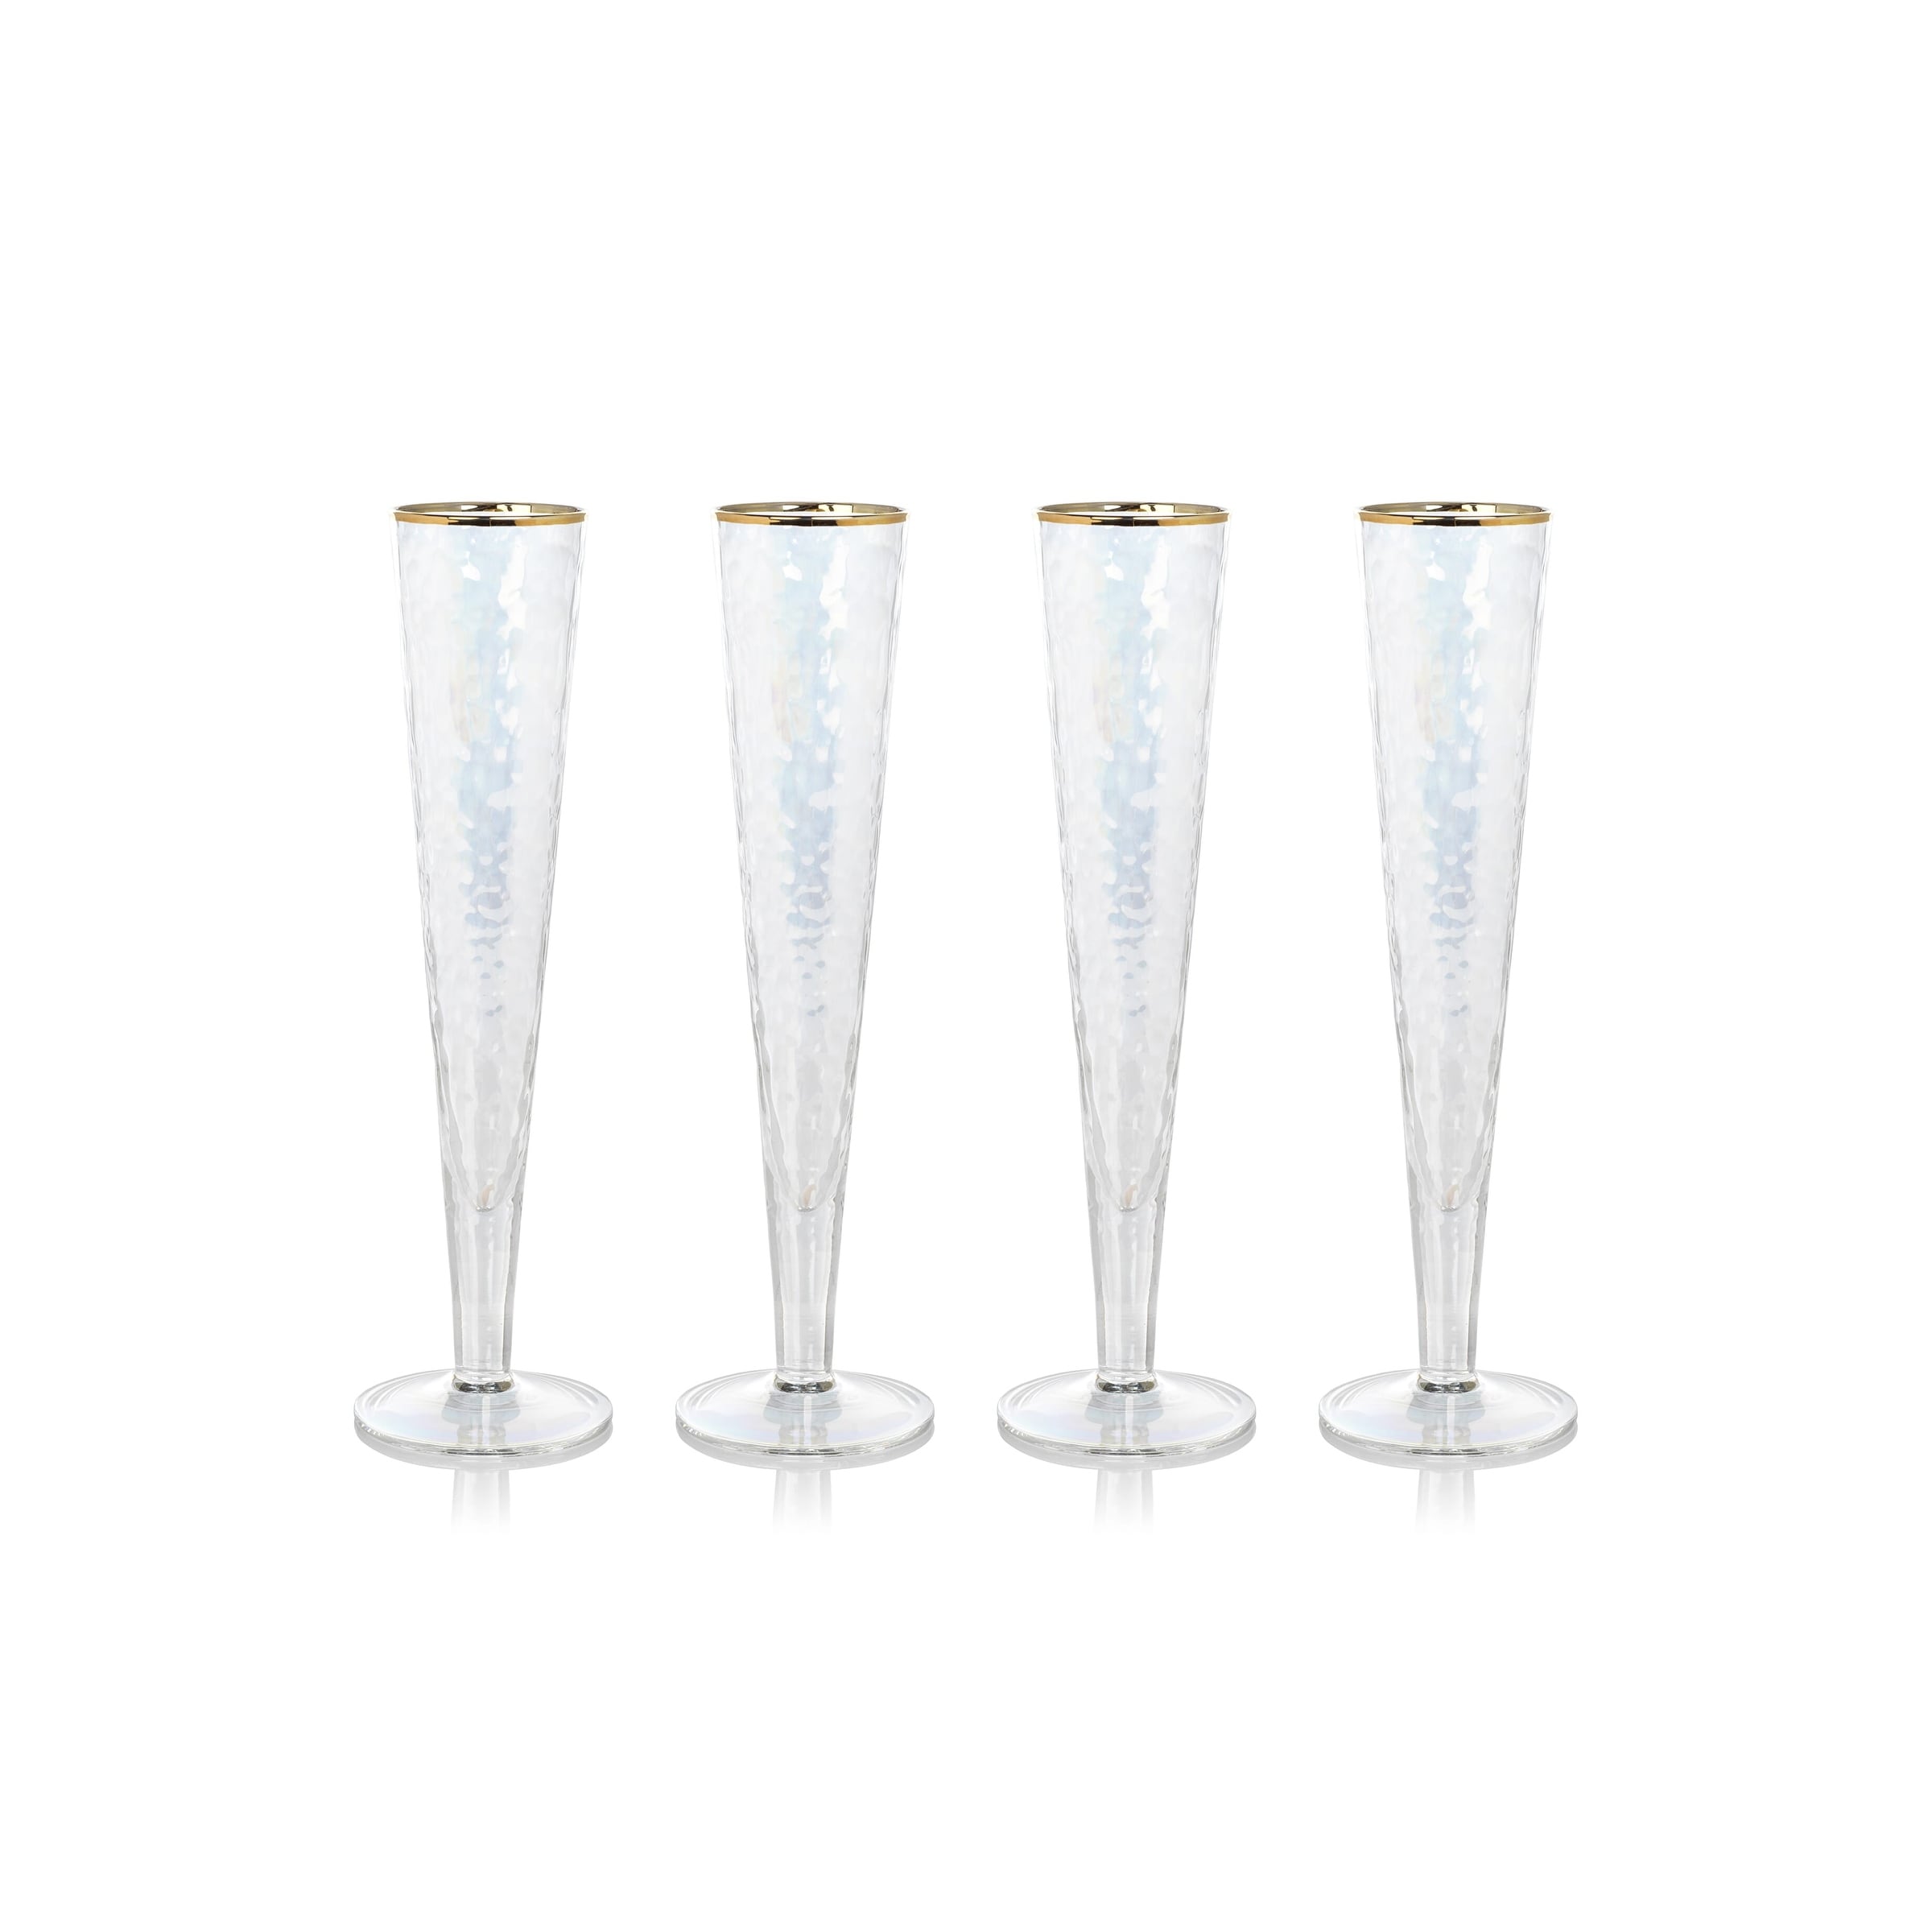 https://ak1.ostkcdn.com/images/products/is/images/direct/bff792256dcf3507547956bc9589397886473368/Kampari-Slim-Champagne-Flutes-with-Gold-Rim%2C-Set-of-4.jpg